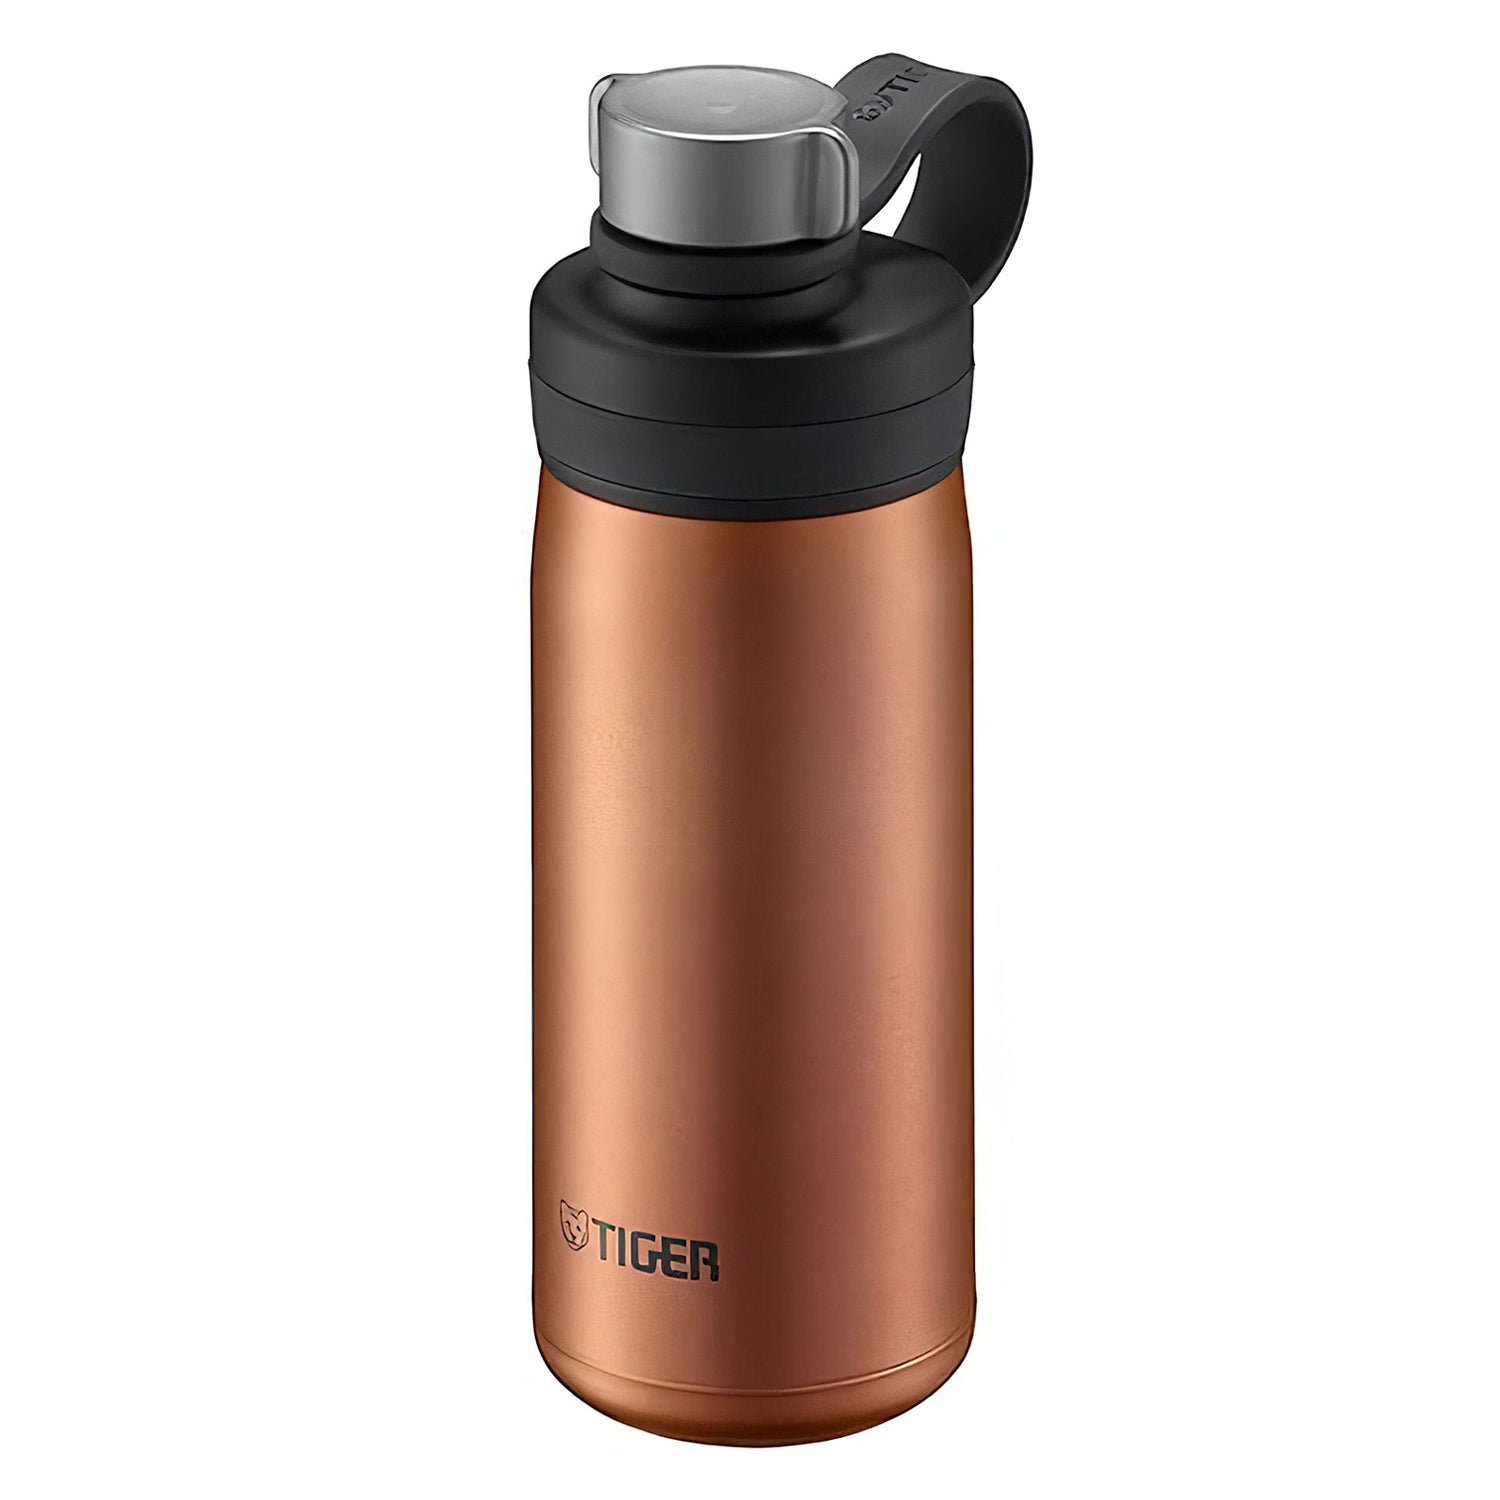 Tiger One Touch Mug Bottle Stainless Steel Water Bottle MMX-A022